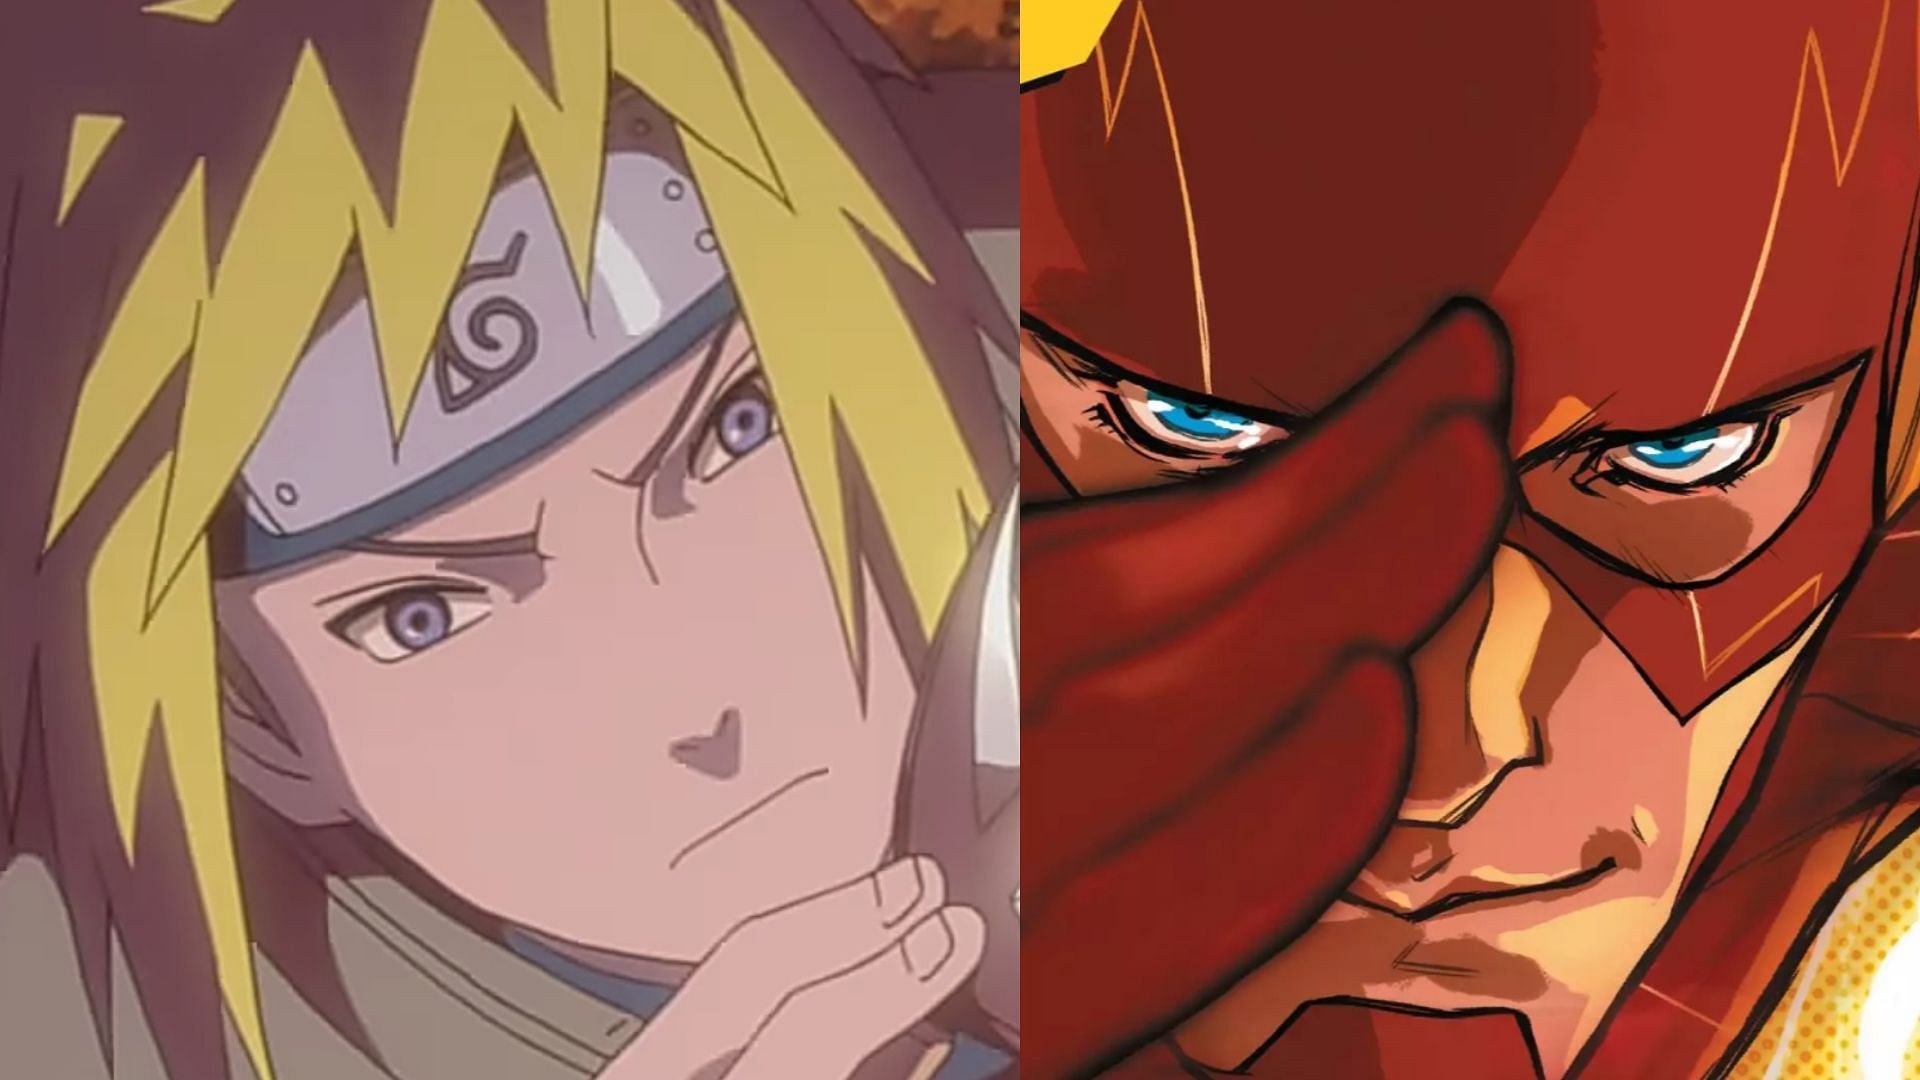 Minato as seen in the Naruto anime and the Flash from the comics (Images via DC Comics and Studio Pierrot)